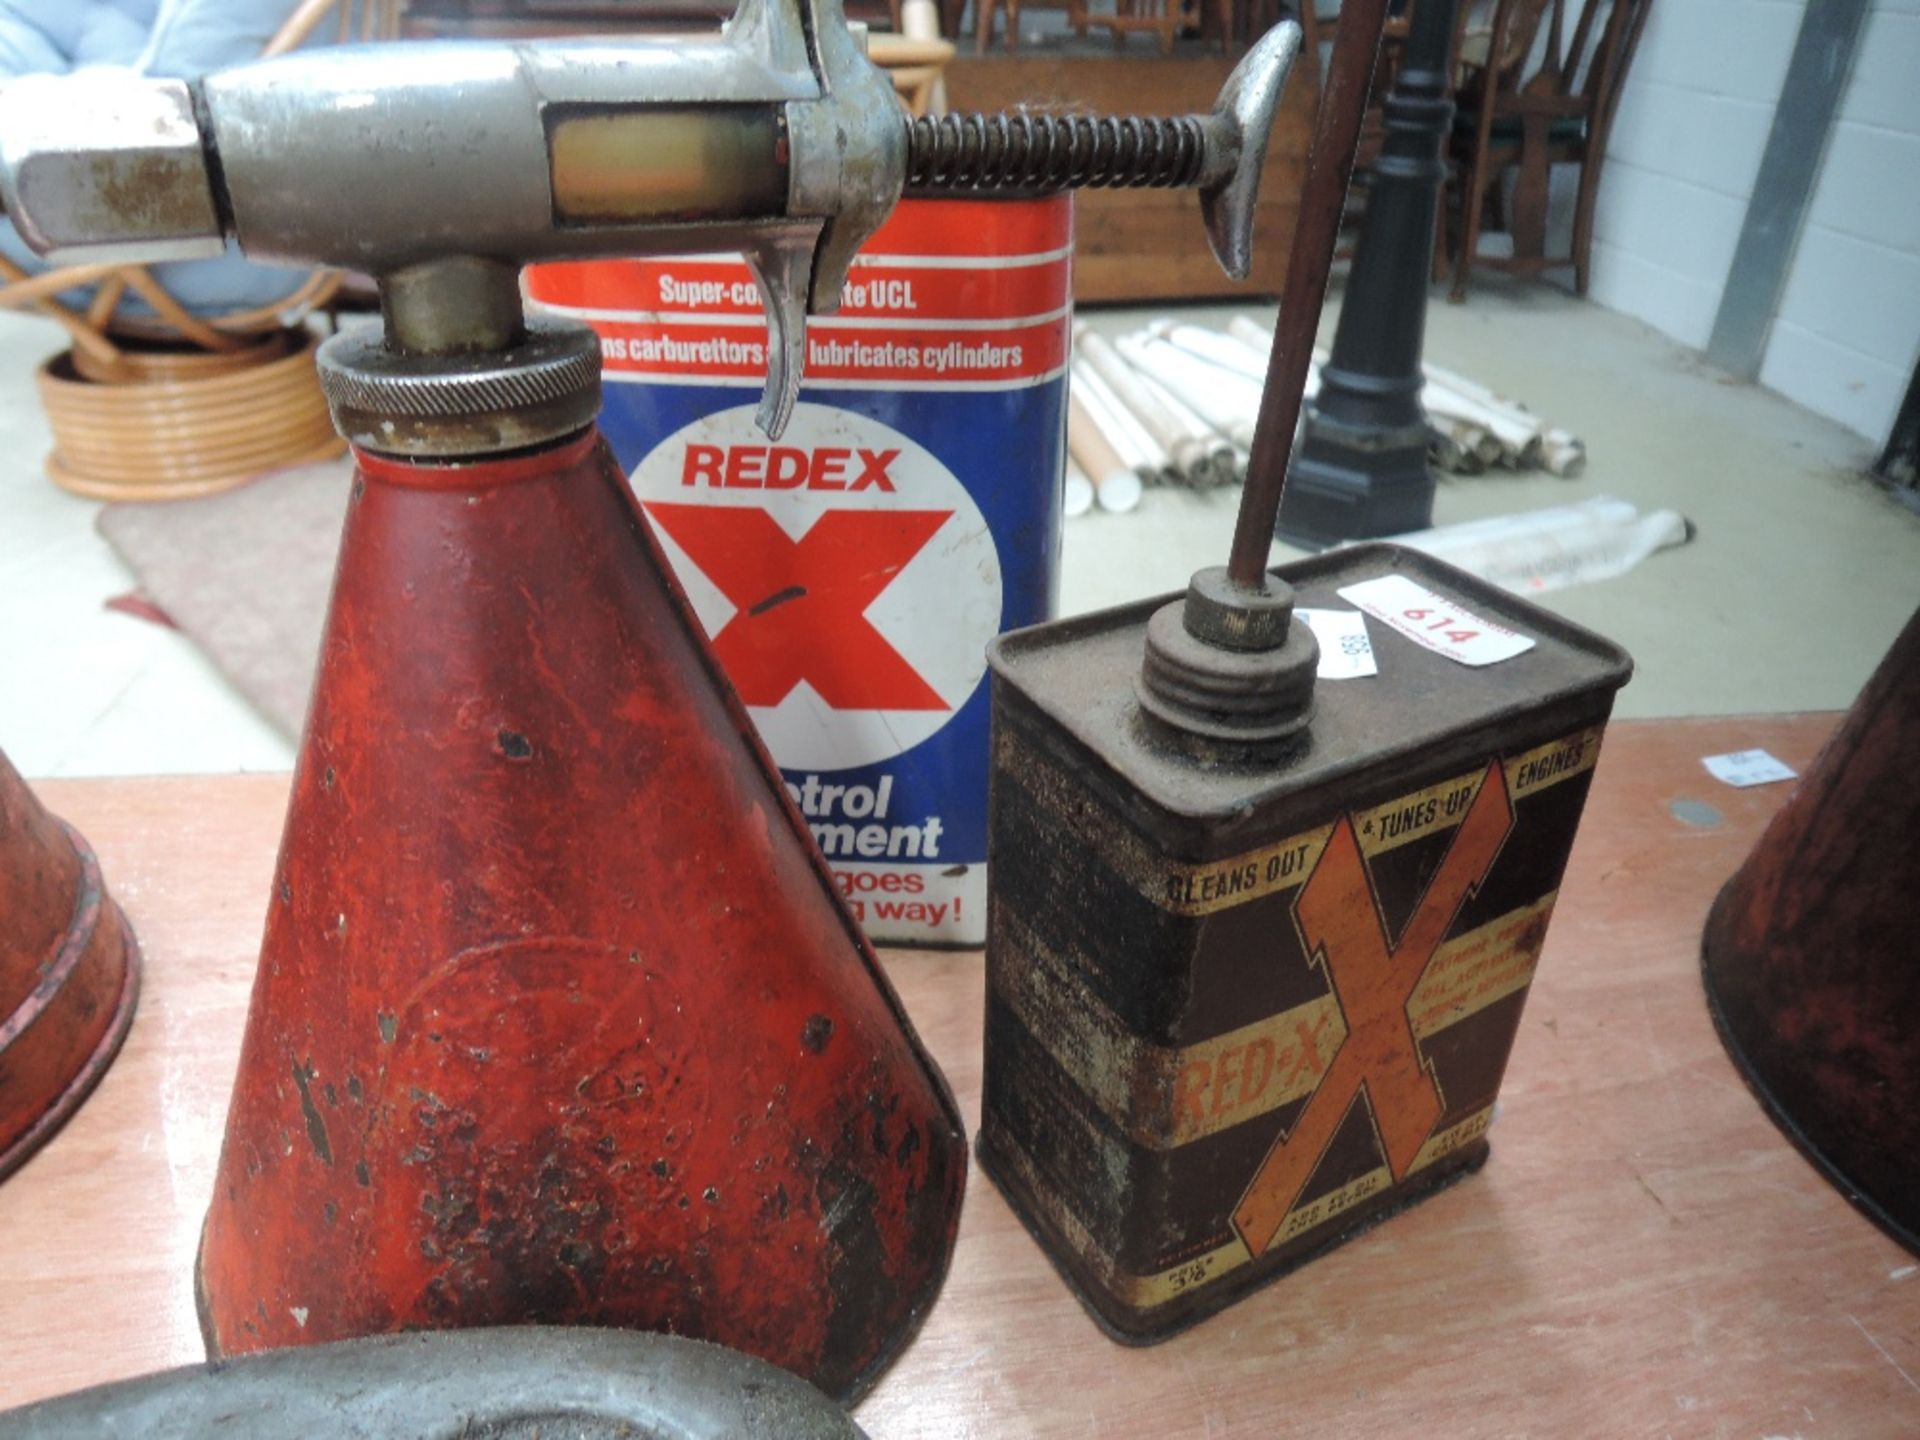 A Redex dispenser and two Redex cans.